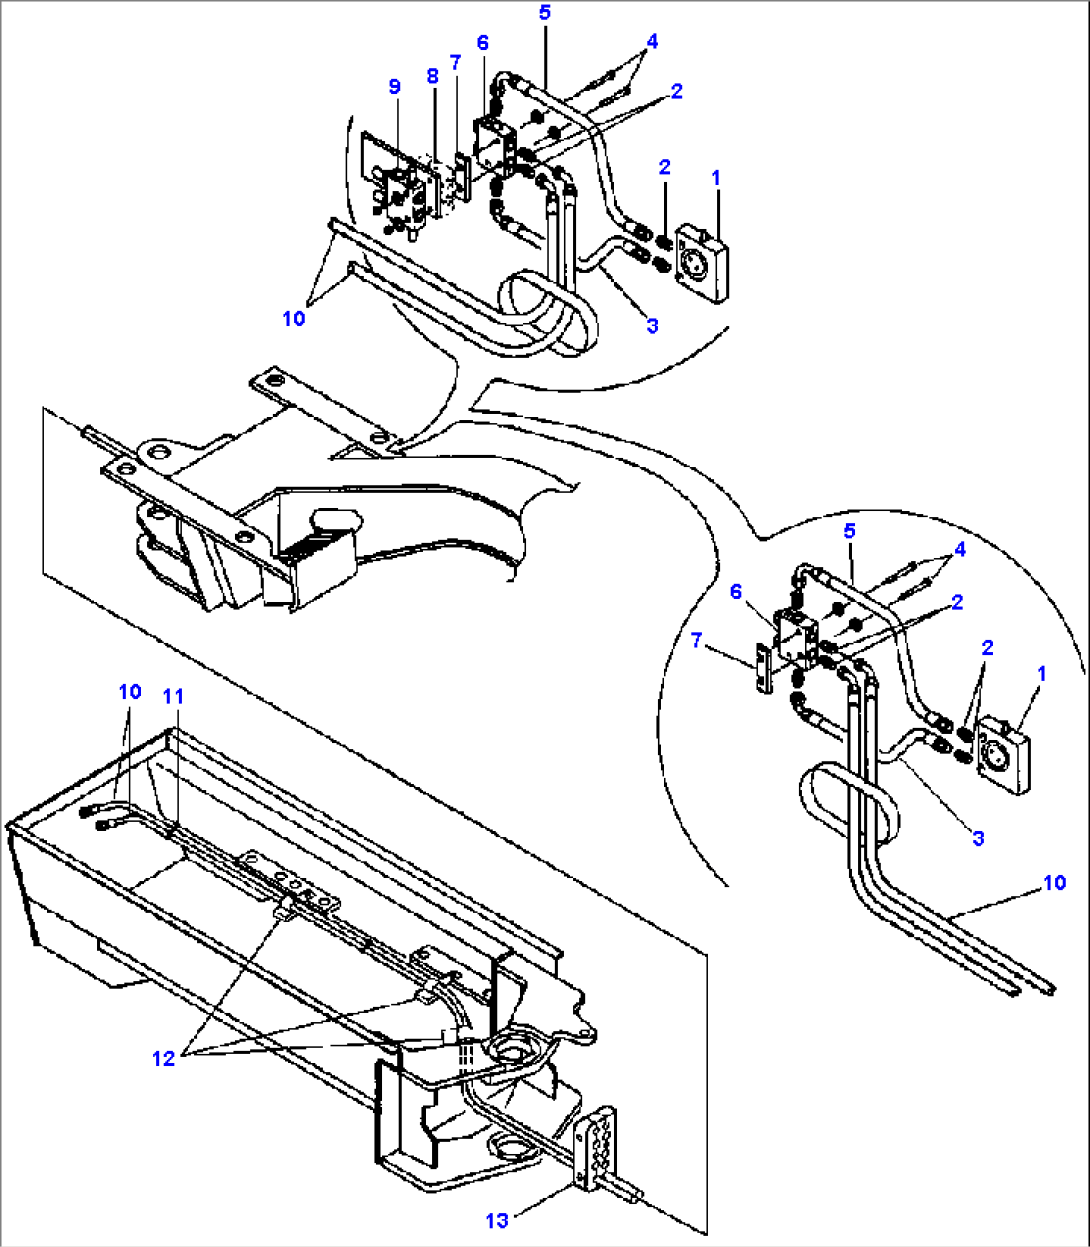 AUXILIARY FRONT AND REAR ACTUATOR LINES WITH CHECK VALVE